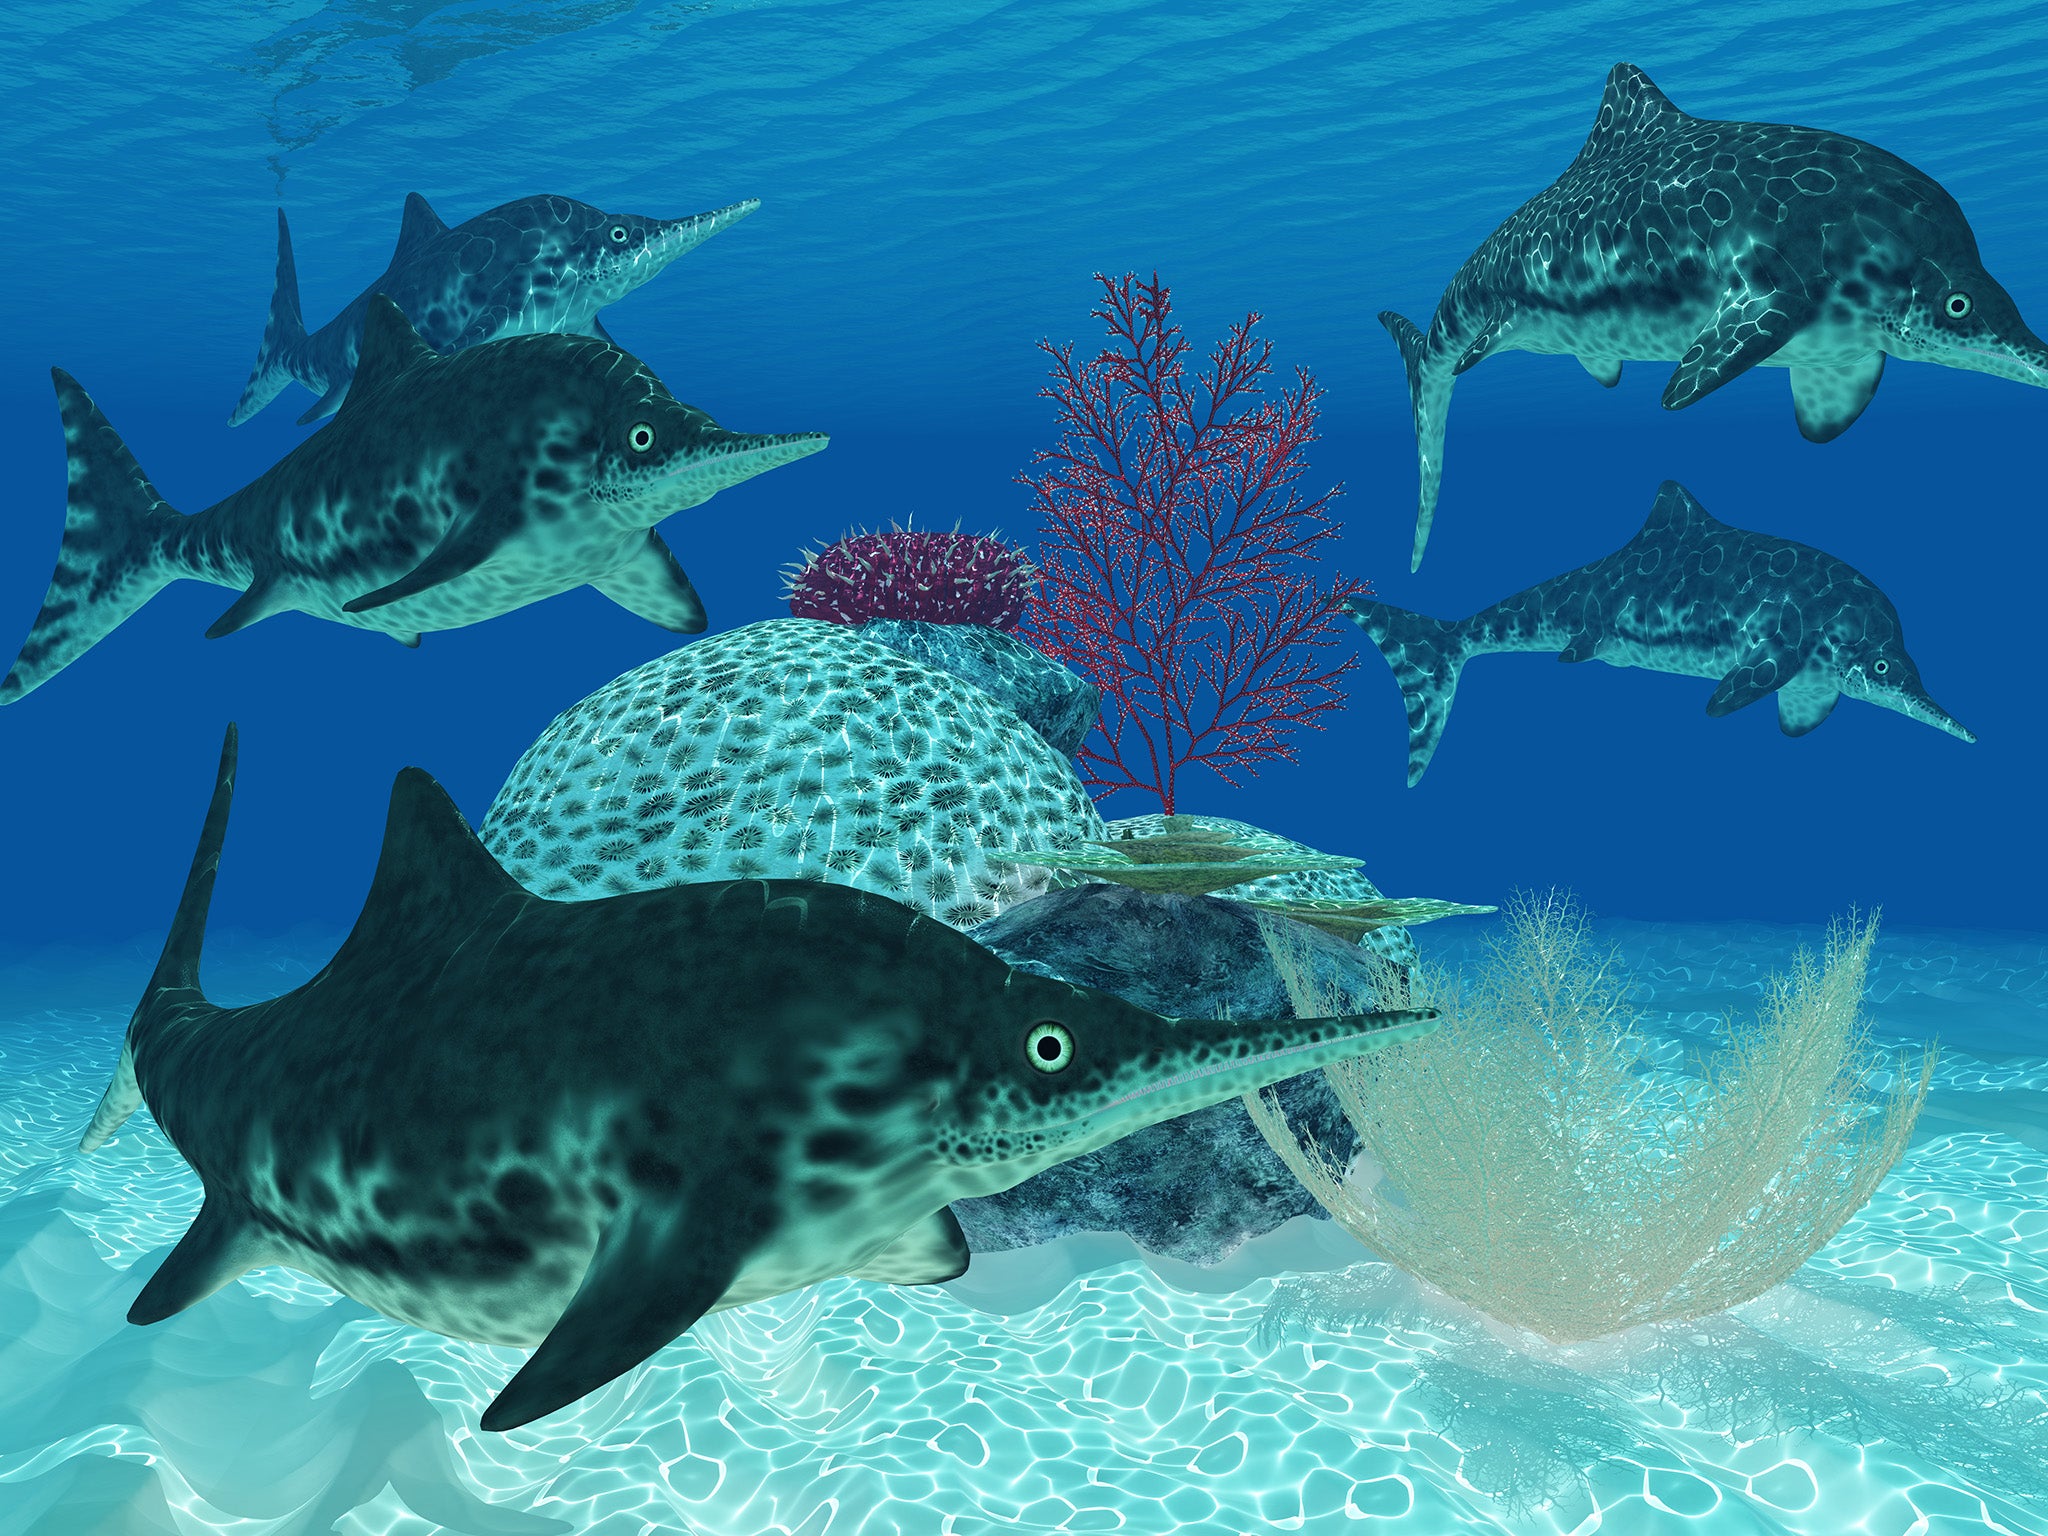 &#13;
Ichthyosaurus was a large marine reptile carnivore from the Triassic and Jurassic eras &#13;